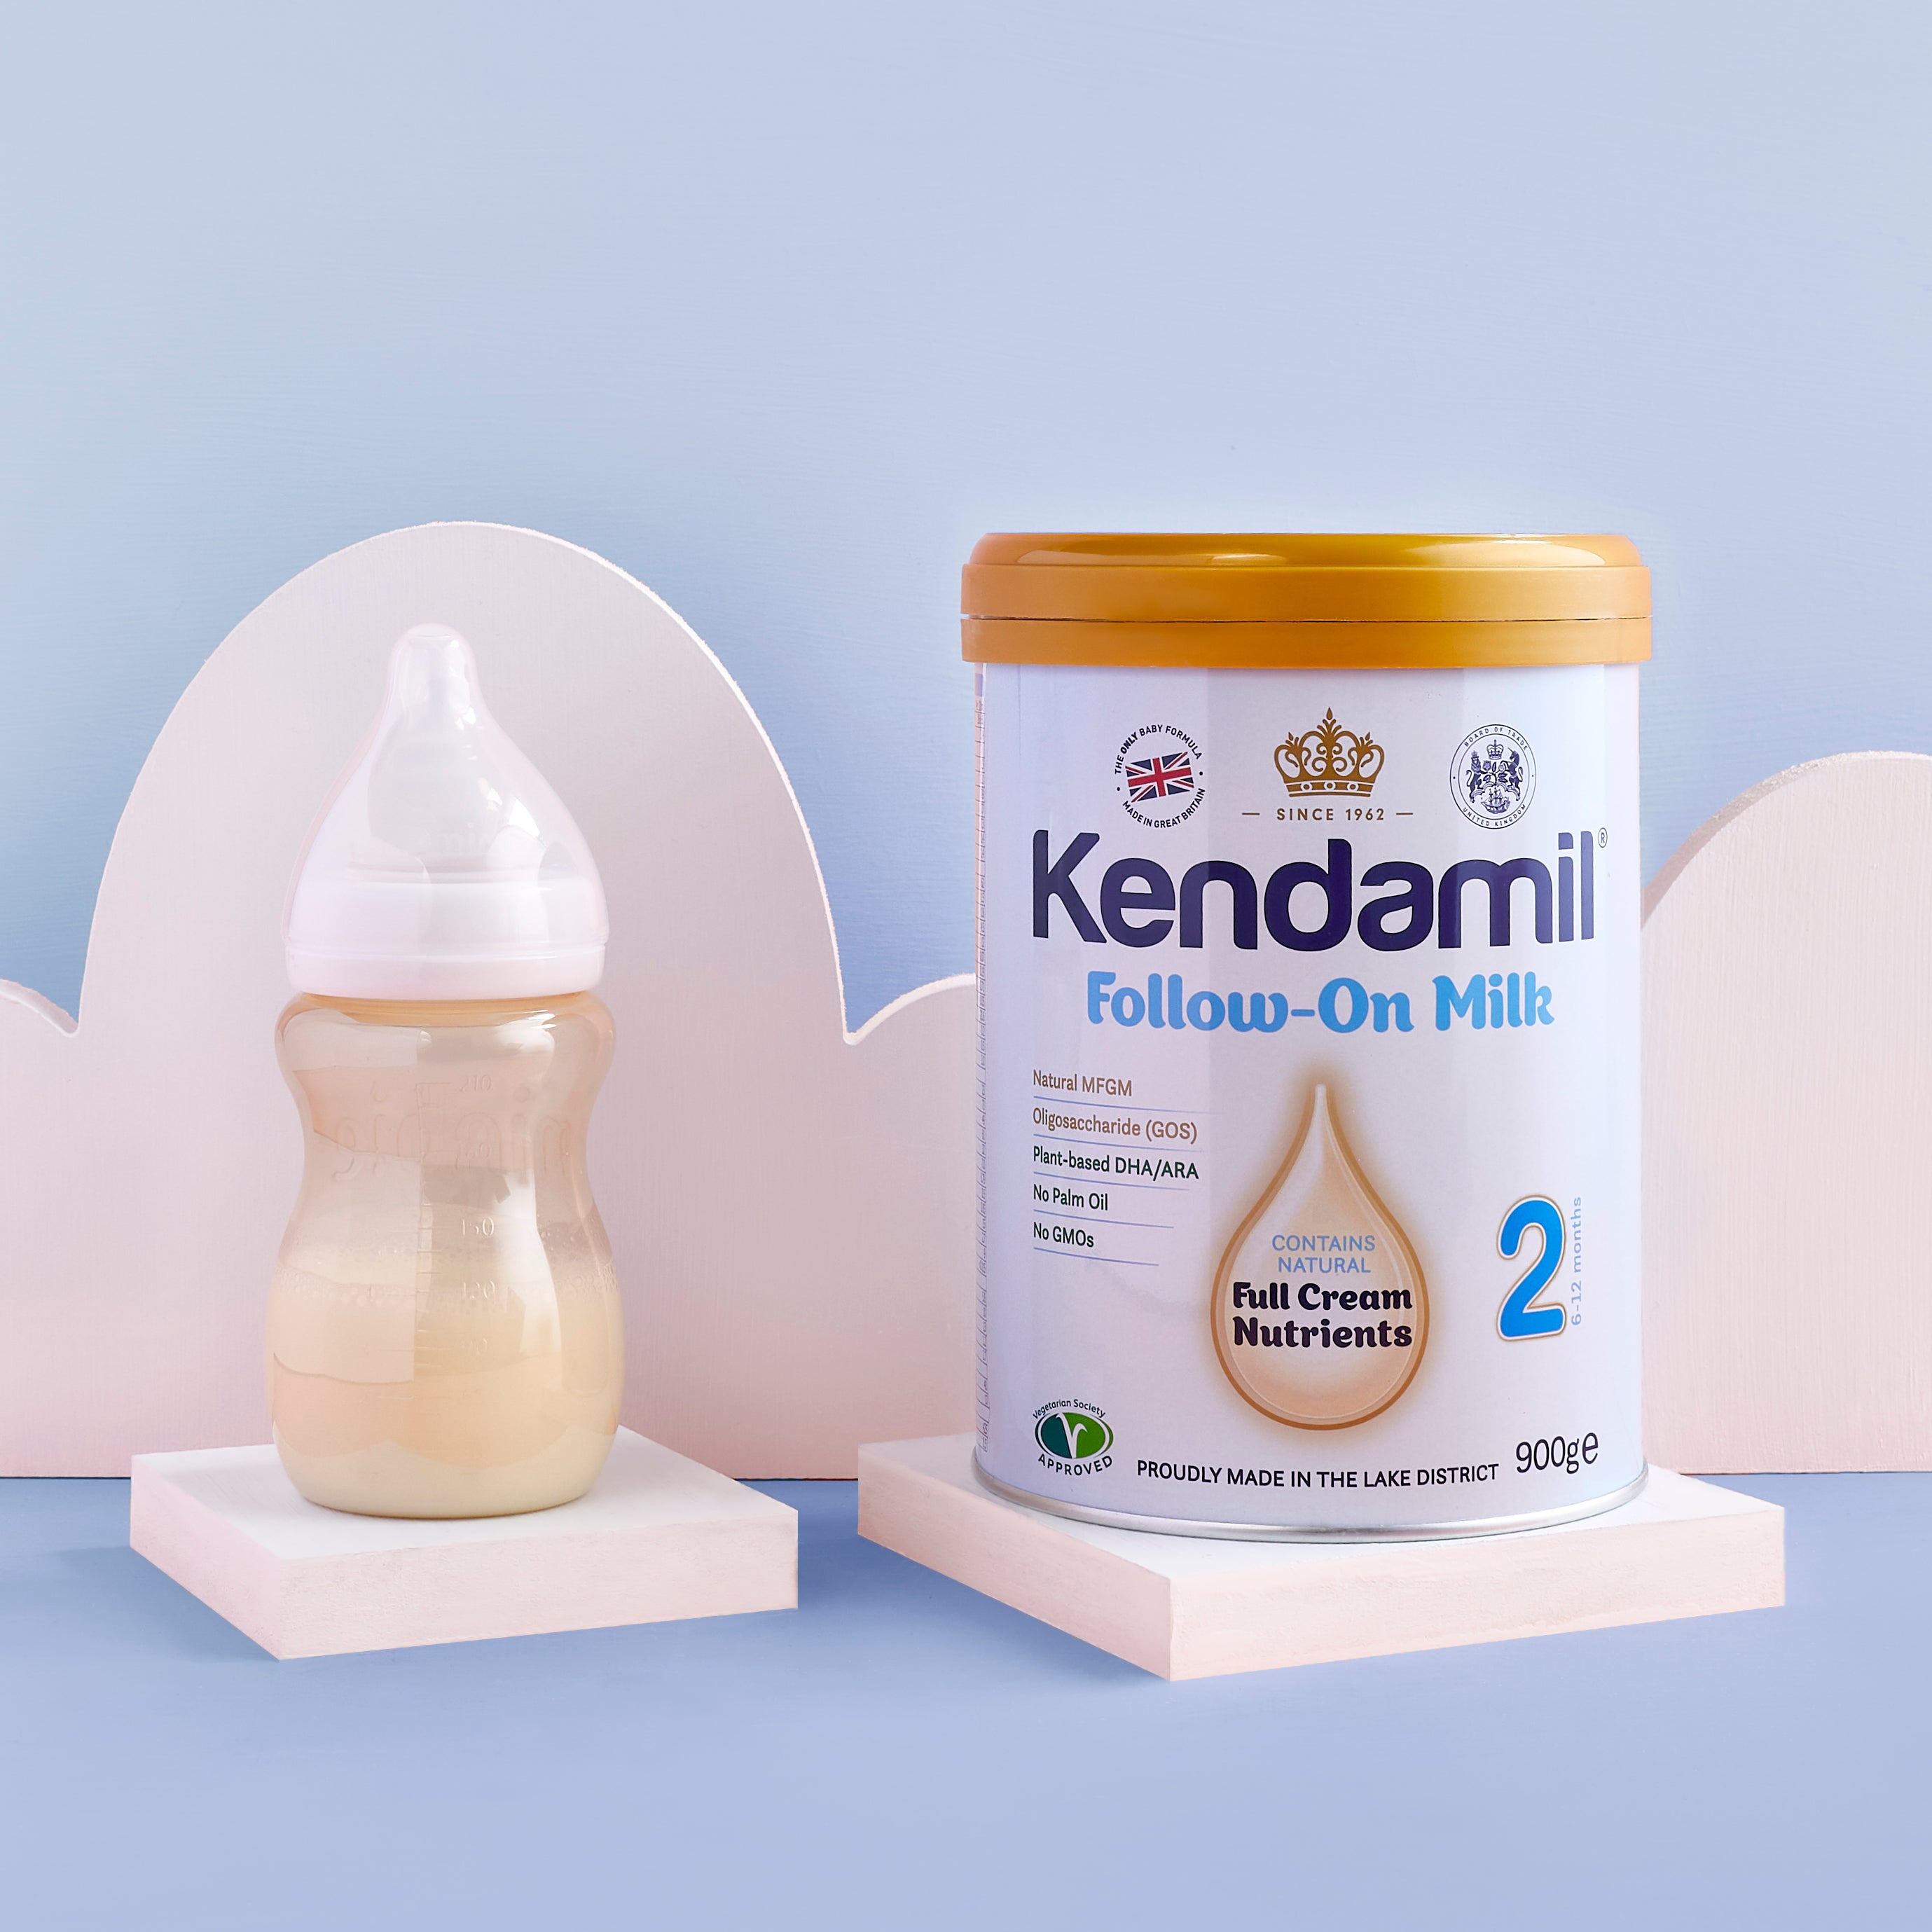 What Makes Kendamil Different?